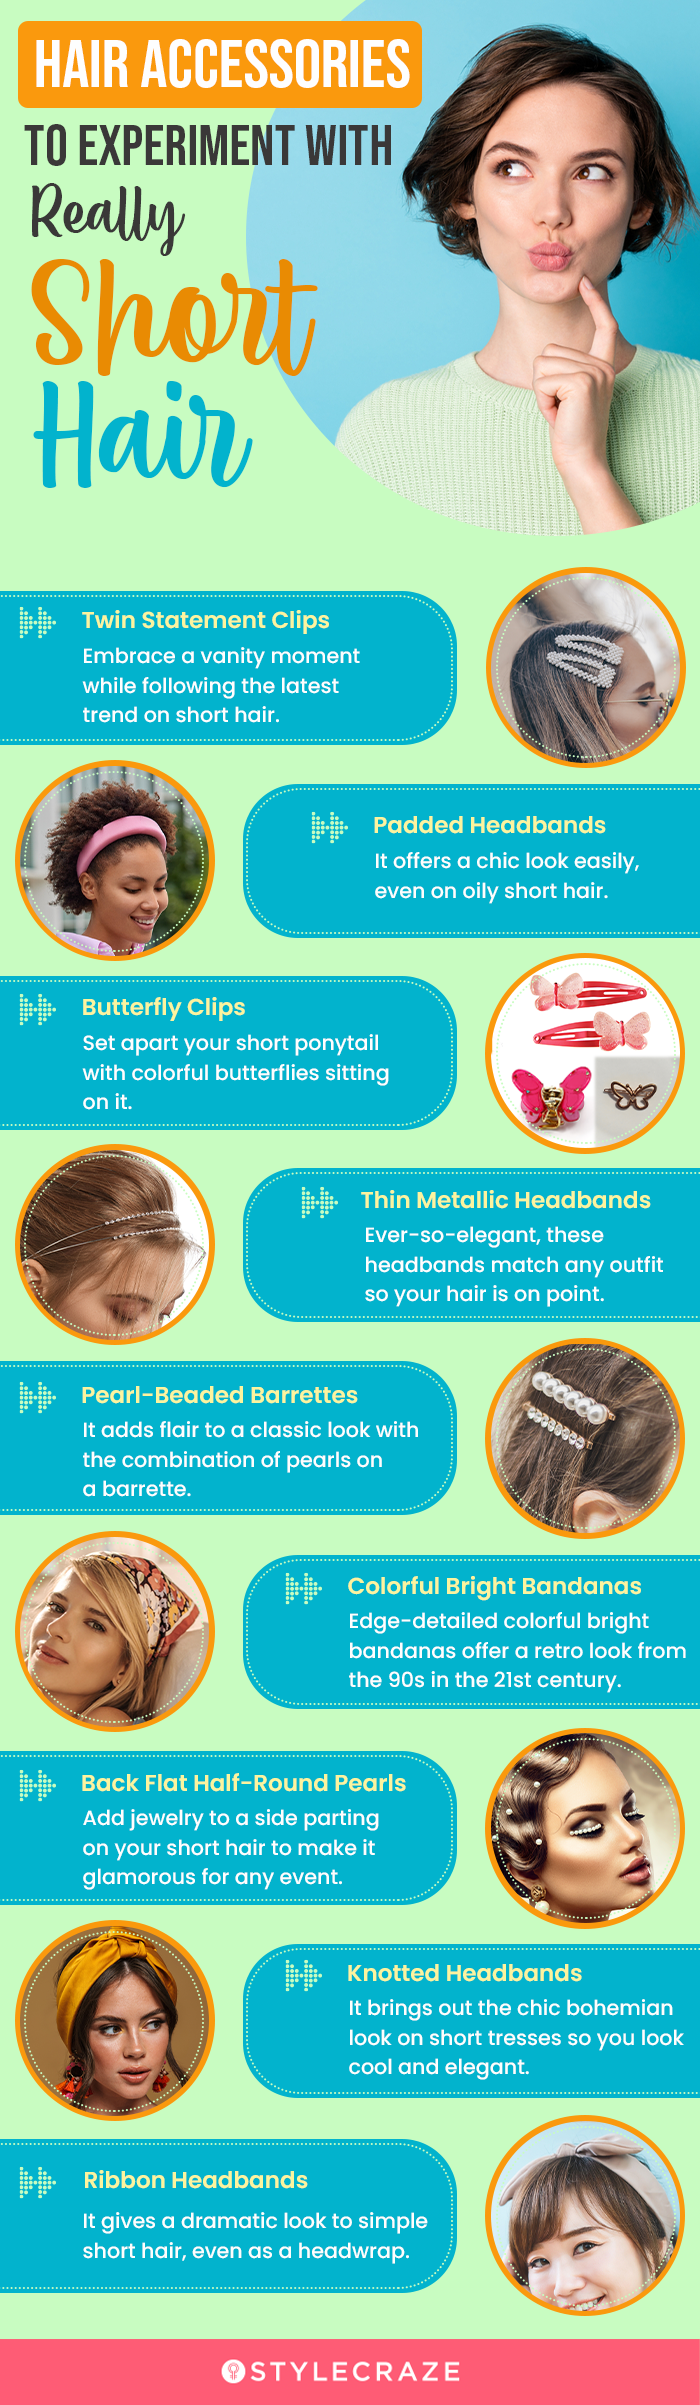 hair accessories to experiment with really short hair (infographic)